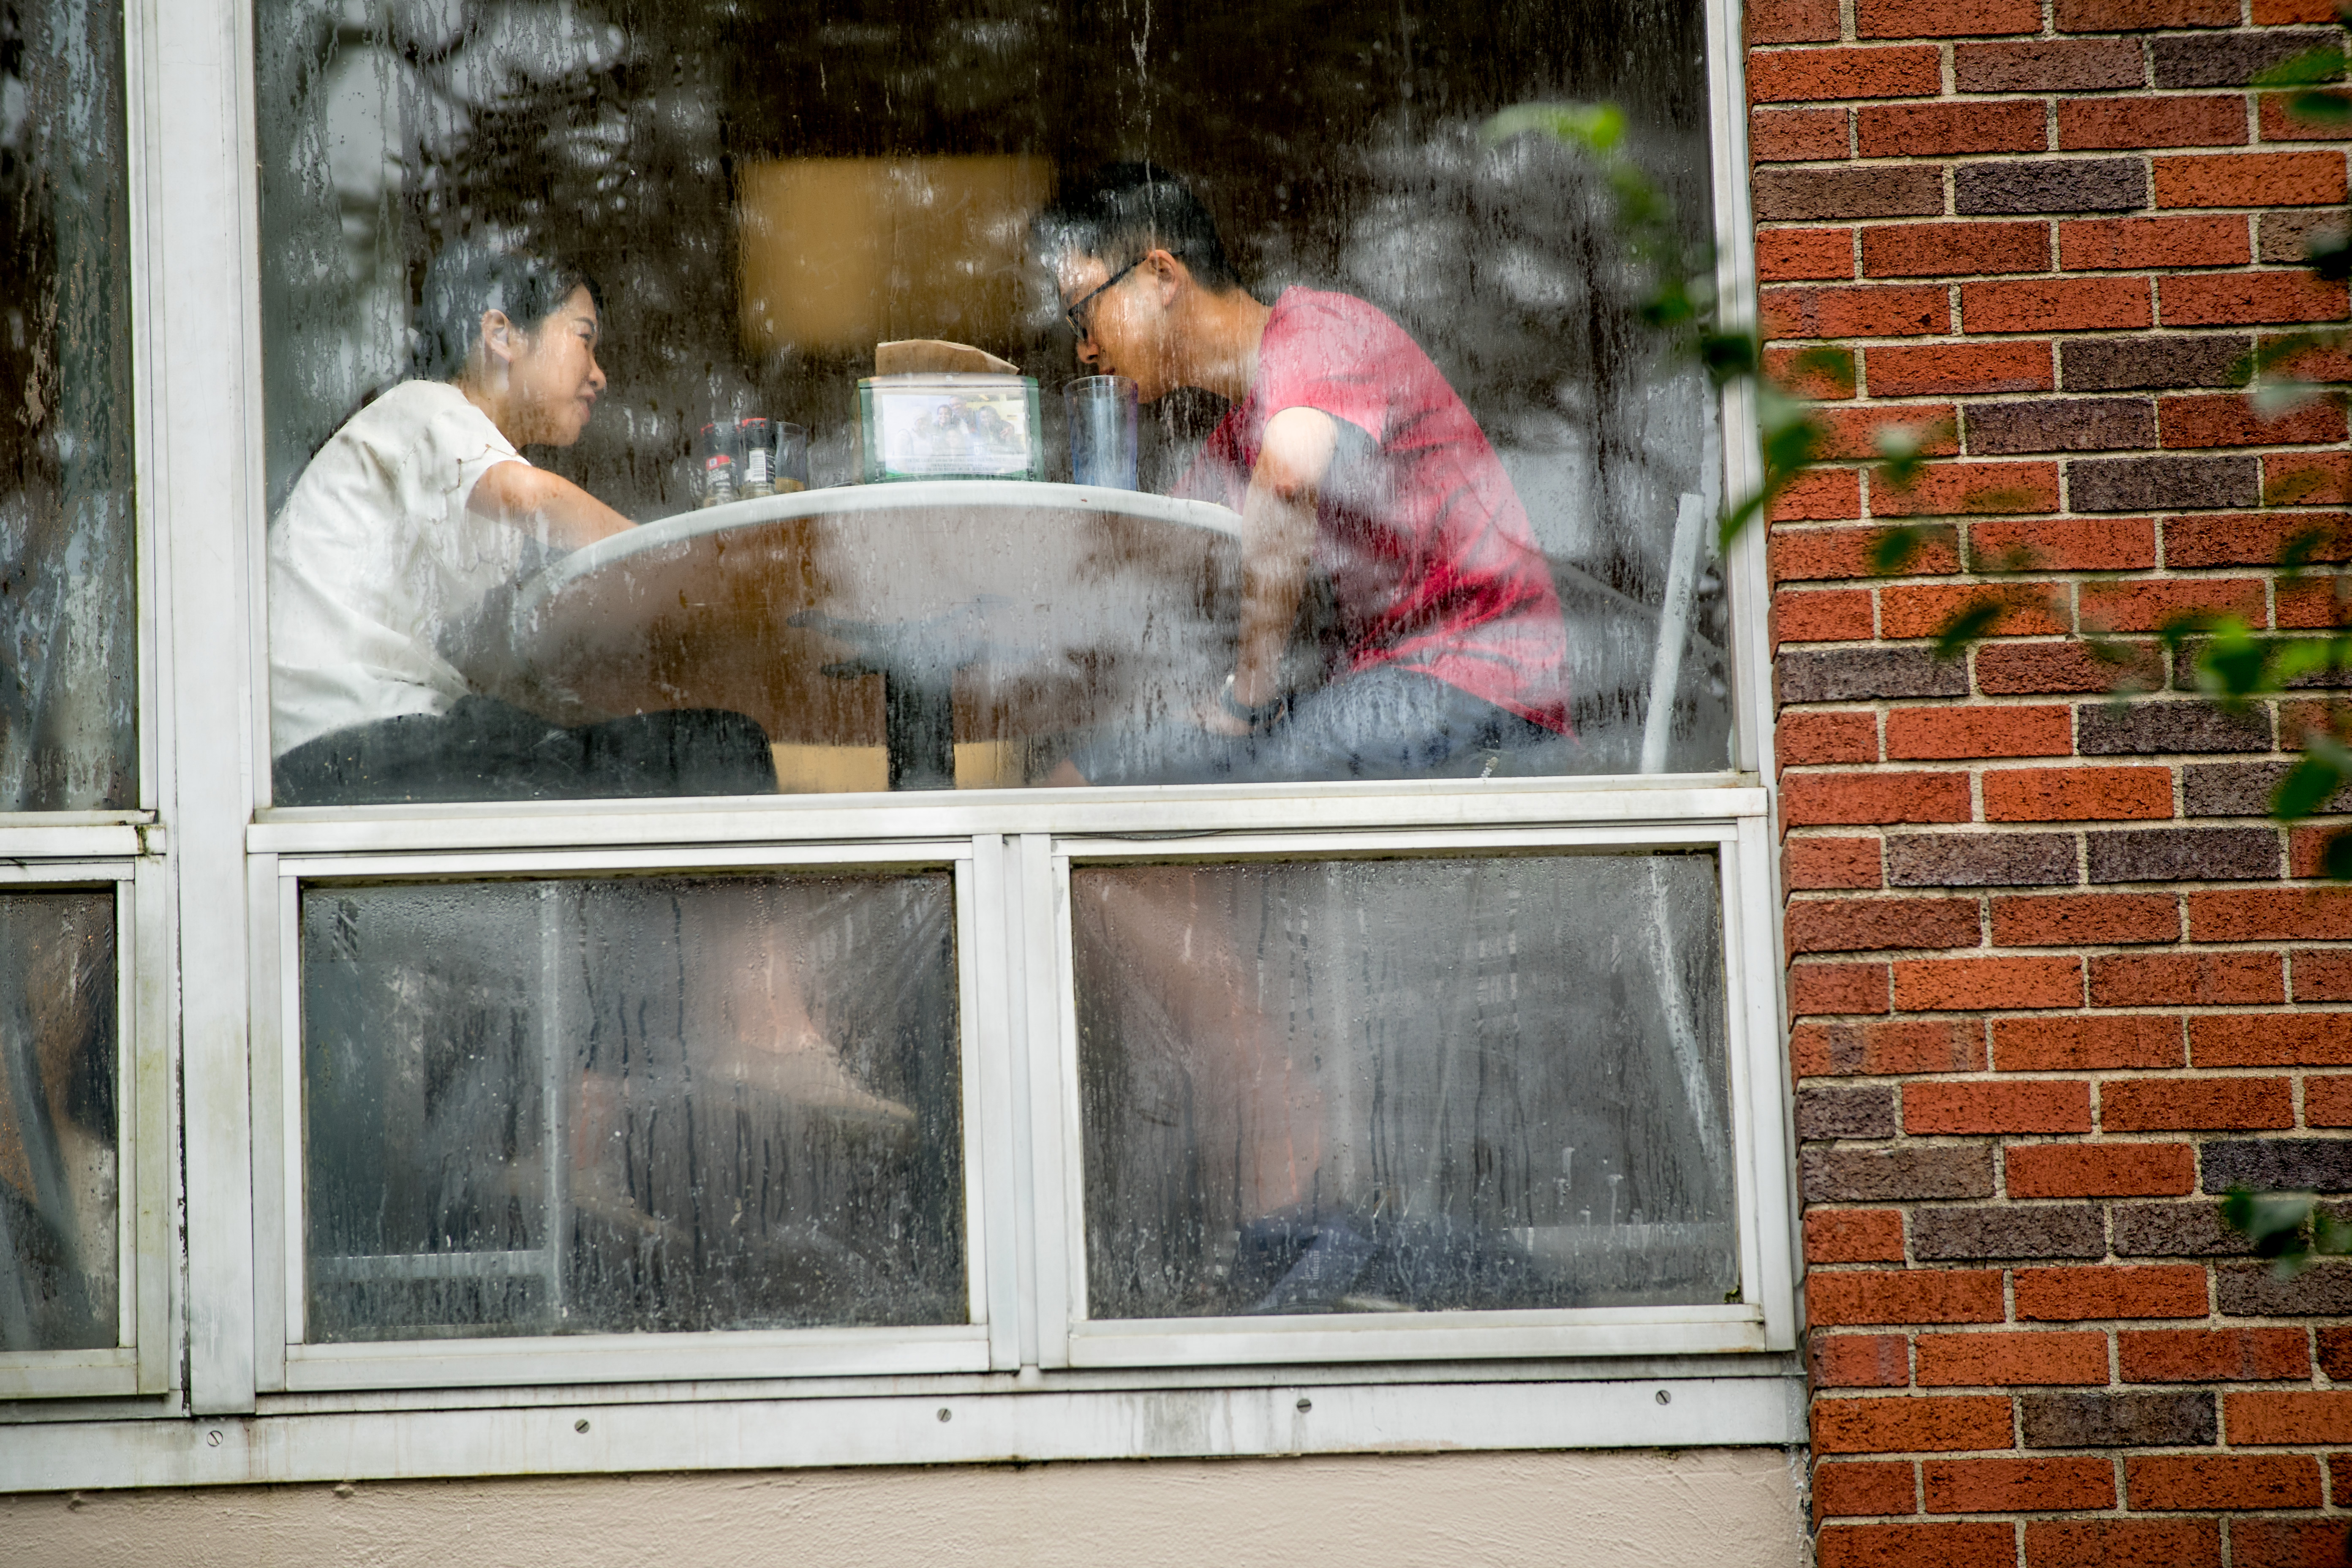 Two students at a lunch table on the other side of a window.